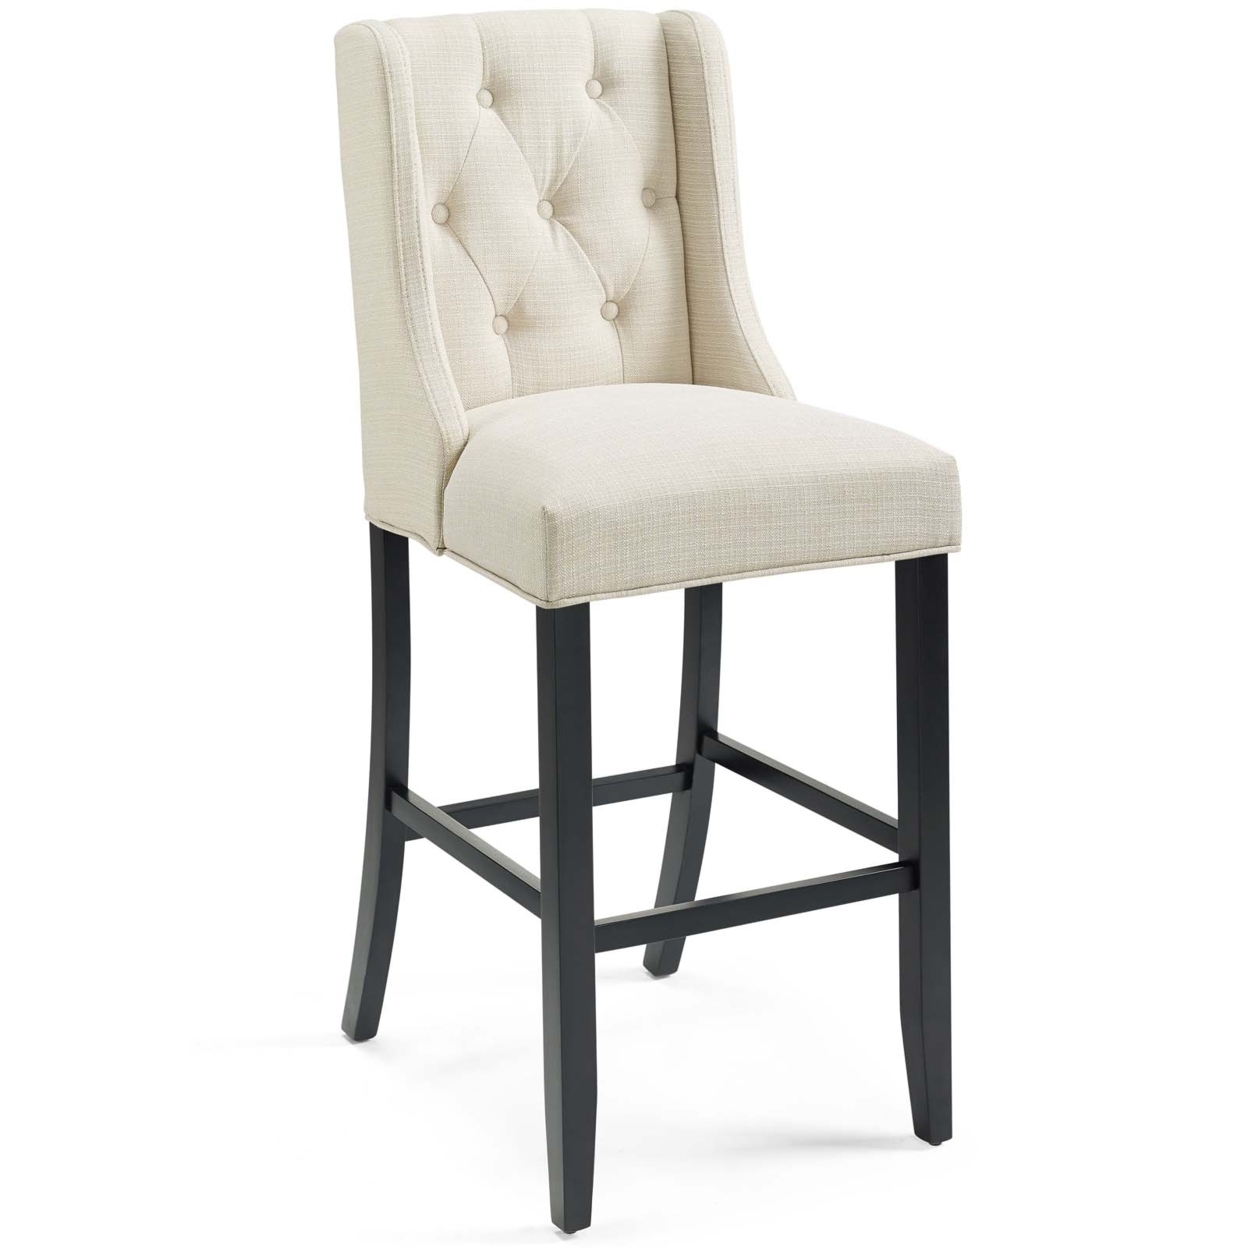 Baronet Tufted Button Upholstered Fabric Bar Stool,Beige